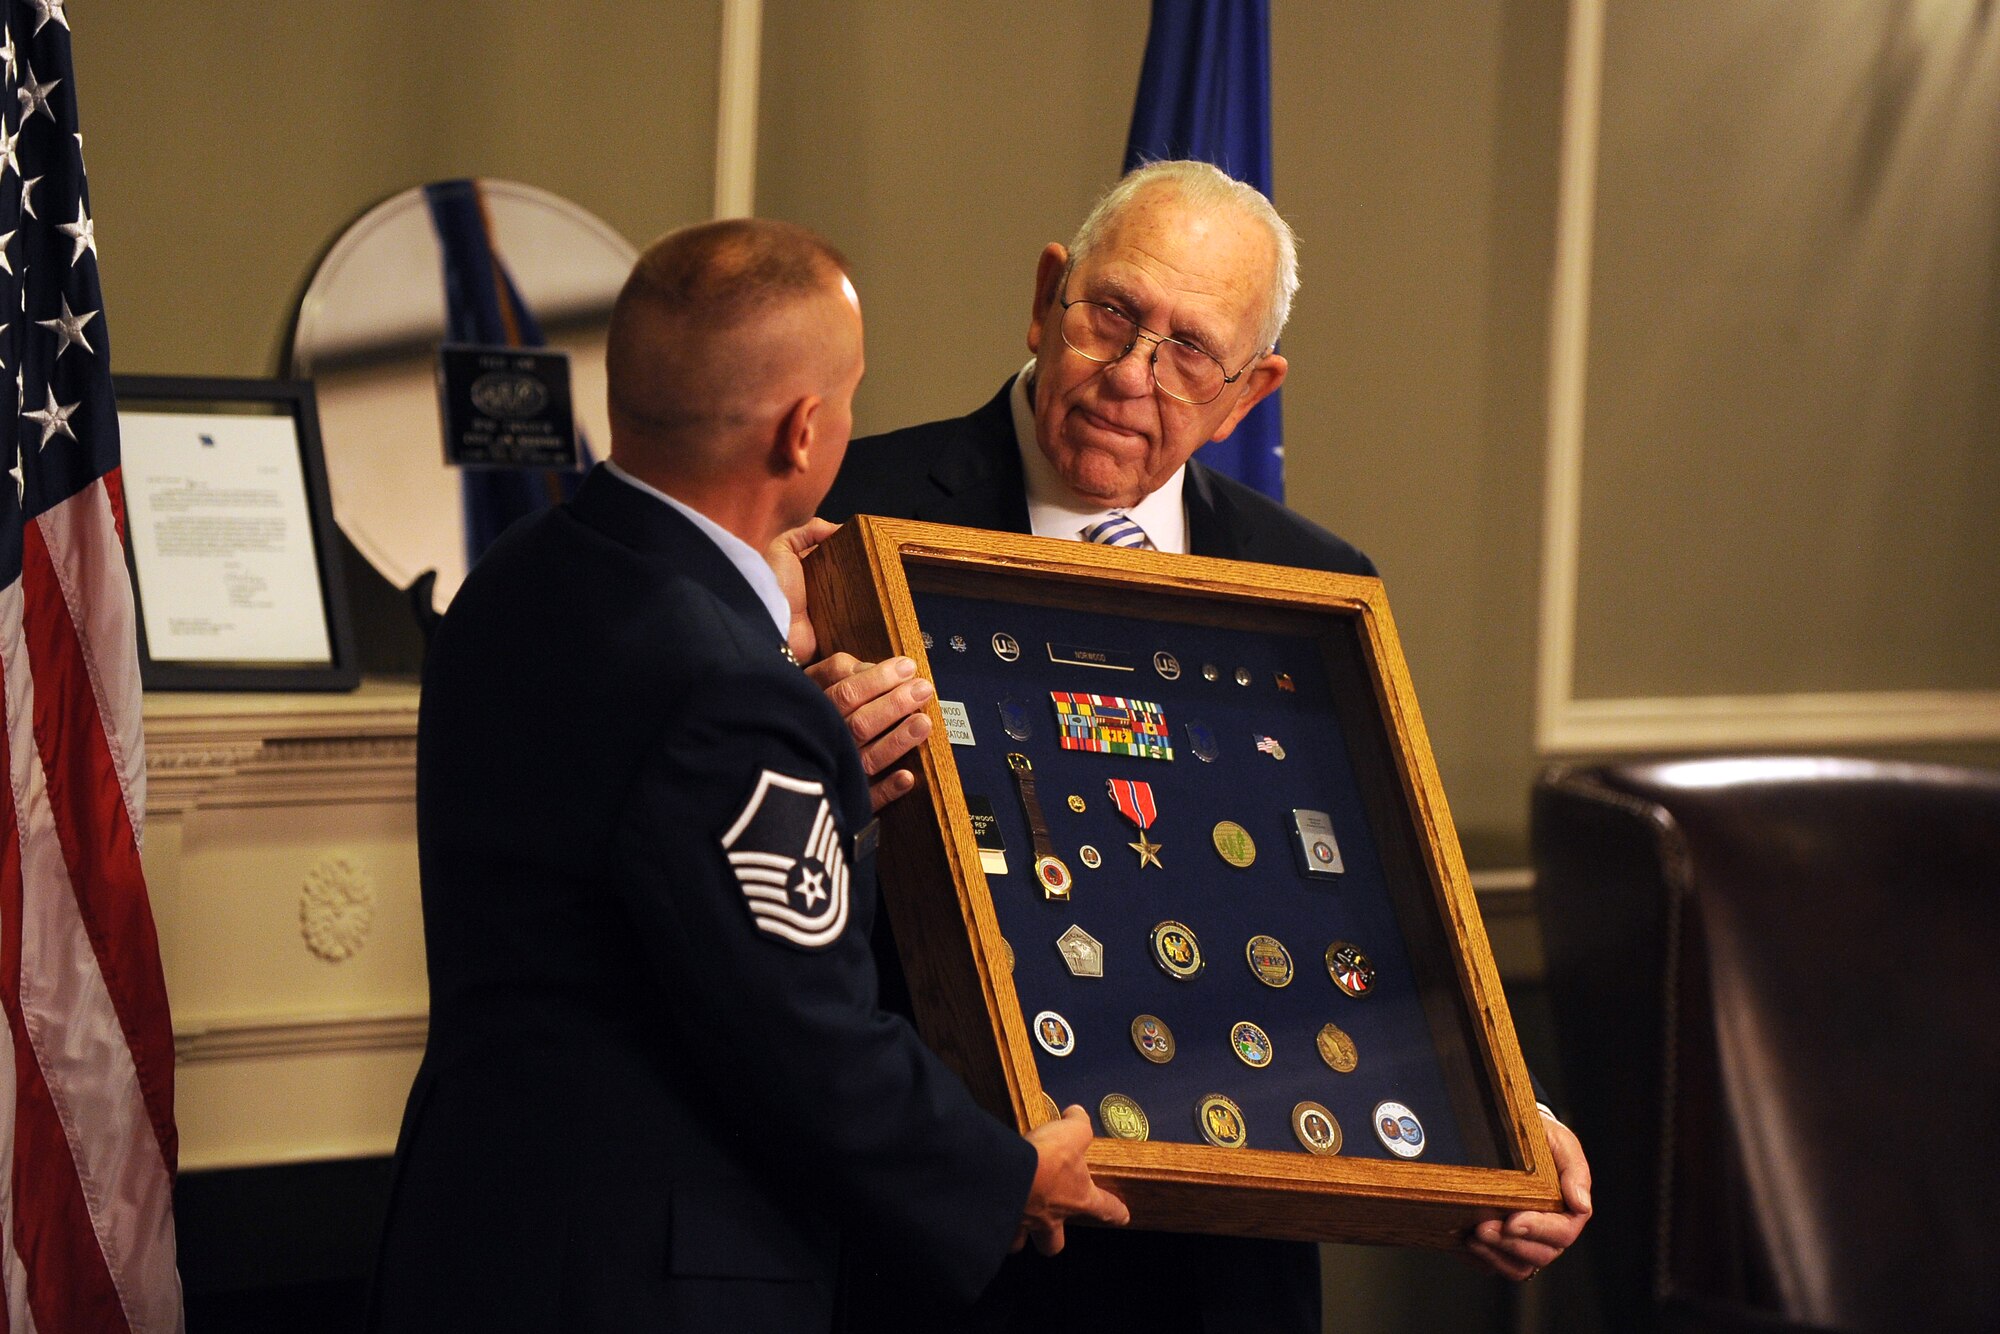 James Norwood, an electronic intelligence advisor with the National Security Agency’s representative office at United States Strategic Command, receives a shadow box from U.S. Air Force Master Sgt. William Bonen, superintendent cryptologic service group with USSTRATCOM, at a retirement ceremony held at the Patriot Club July 31 on Offutt Air Force Base, Neb.  The nearly 60 years of combined enlisted and civil service medals and trinkets adorned the shadow box which is usually given to military retirees.  (U.S. Air Force photo by Josh Plueger/Released)